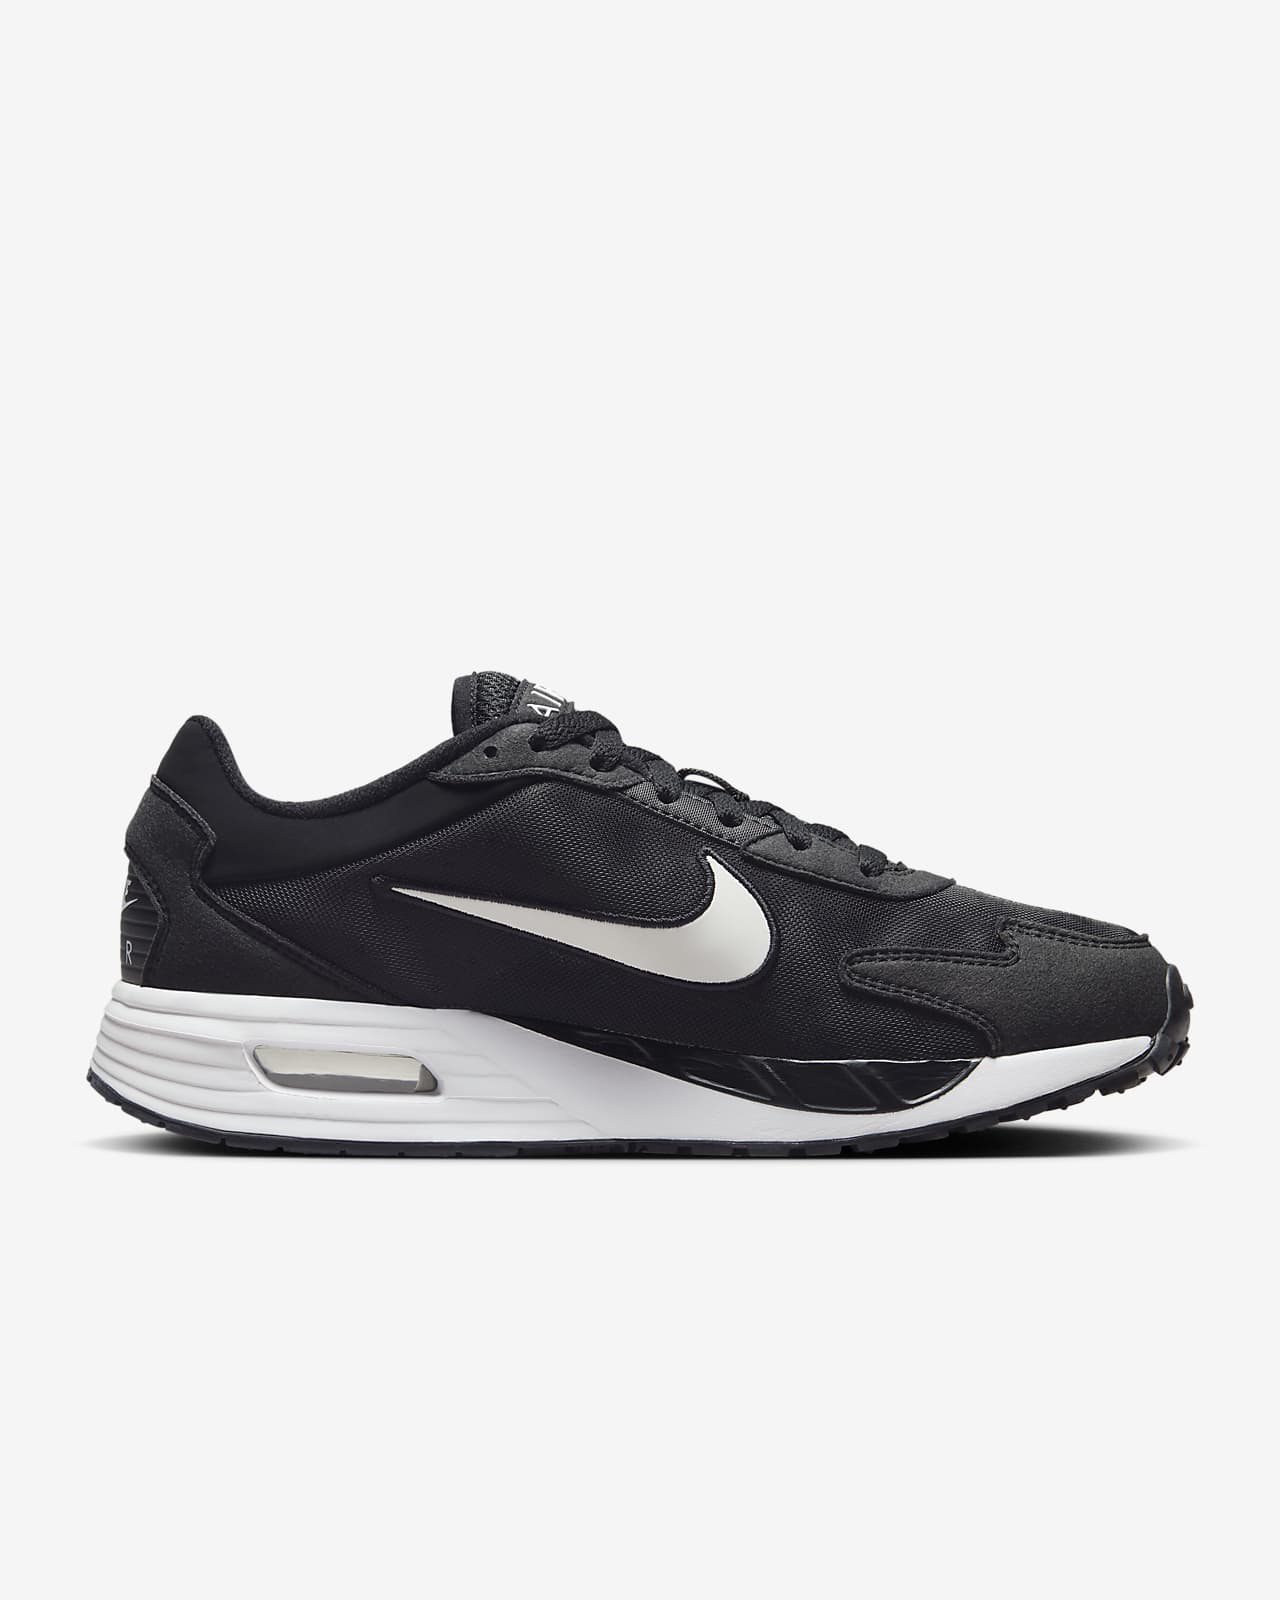 Nike Men's Air Max Solo Shoes in Black, Size: 10 | DX3666-002